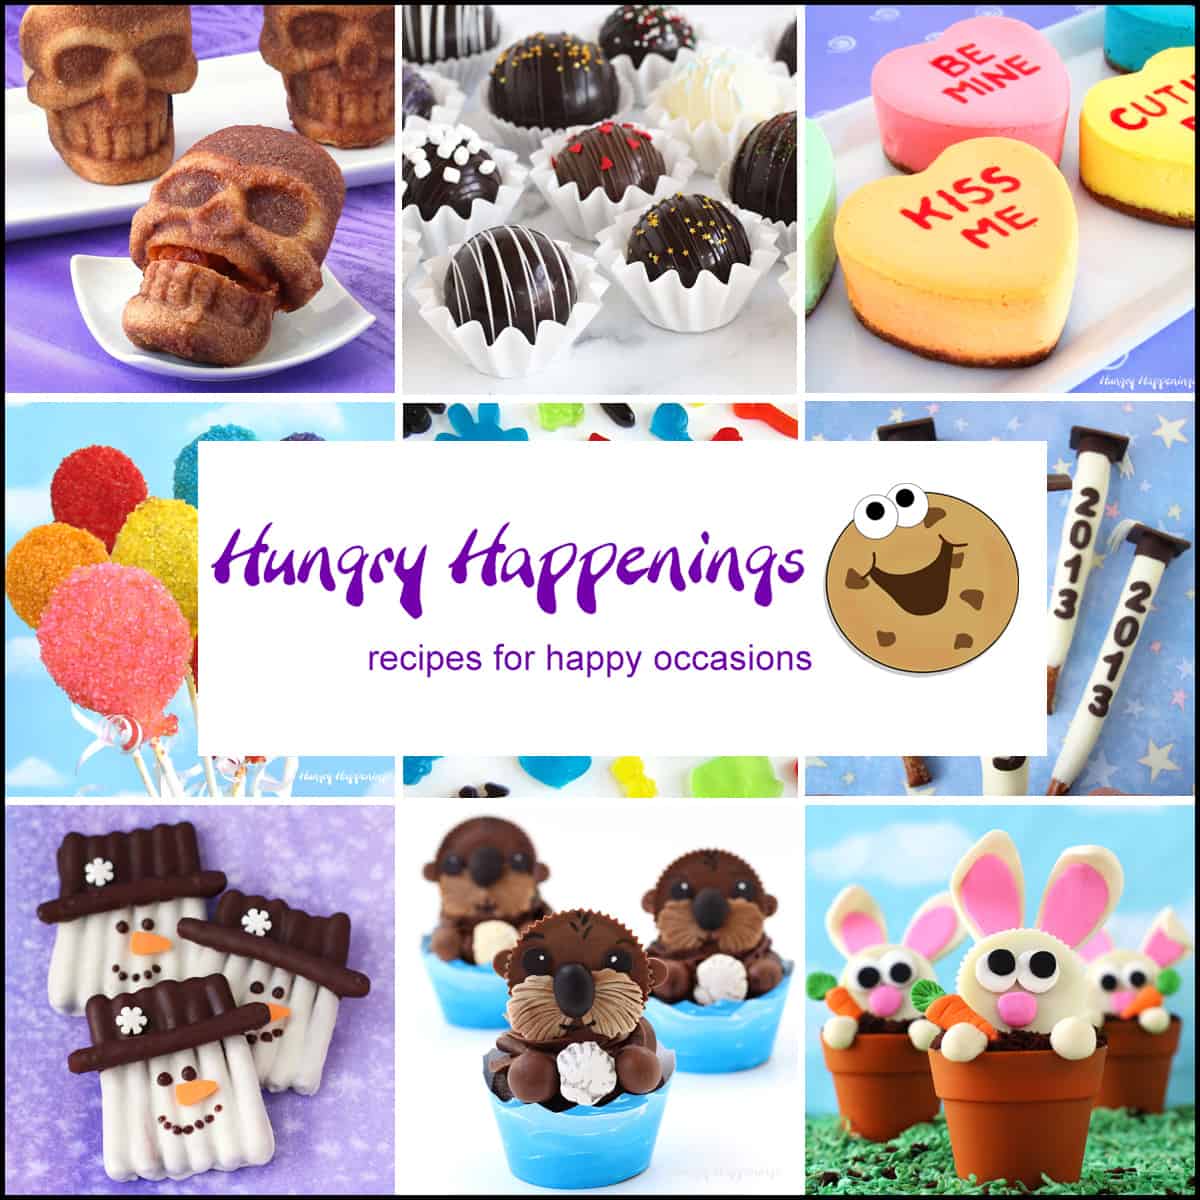 Hungry Happenings collage of fun food